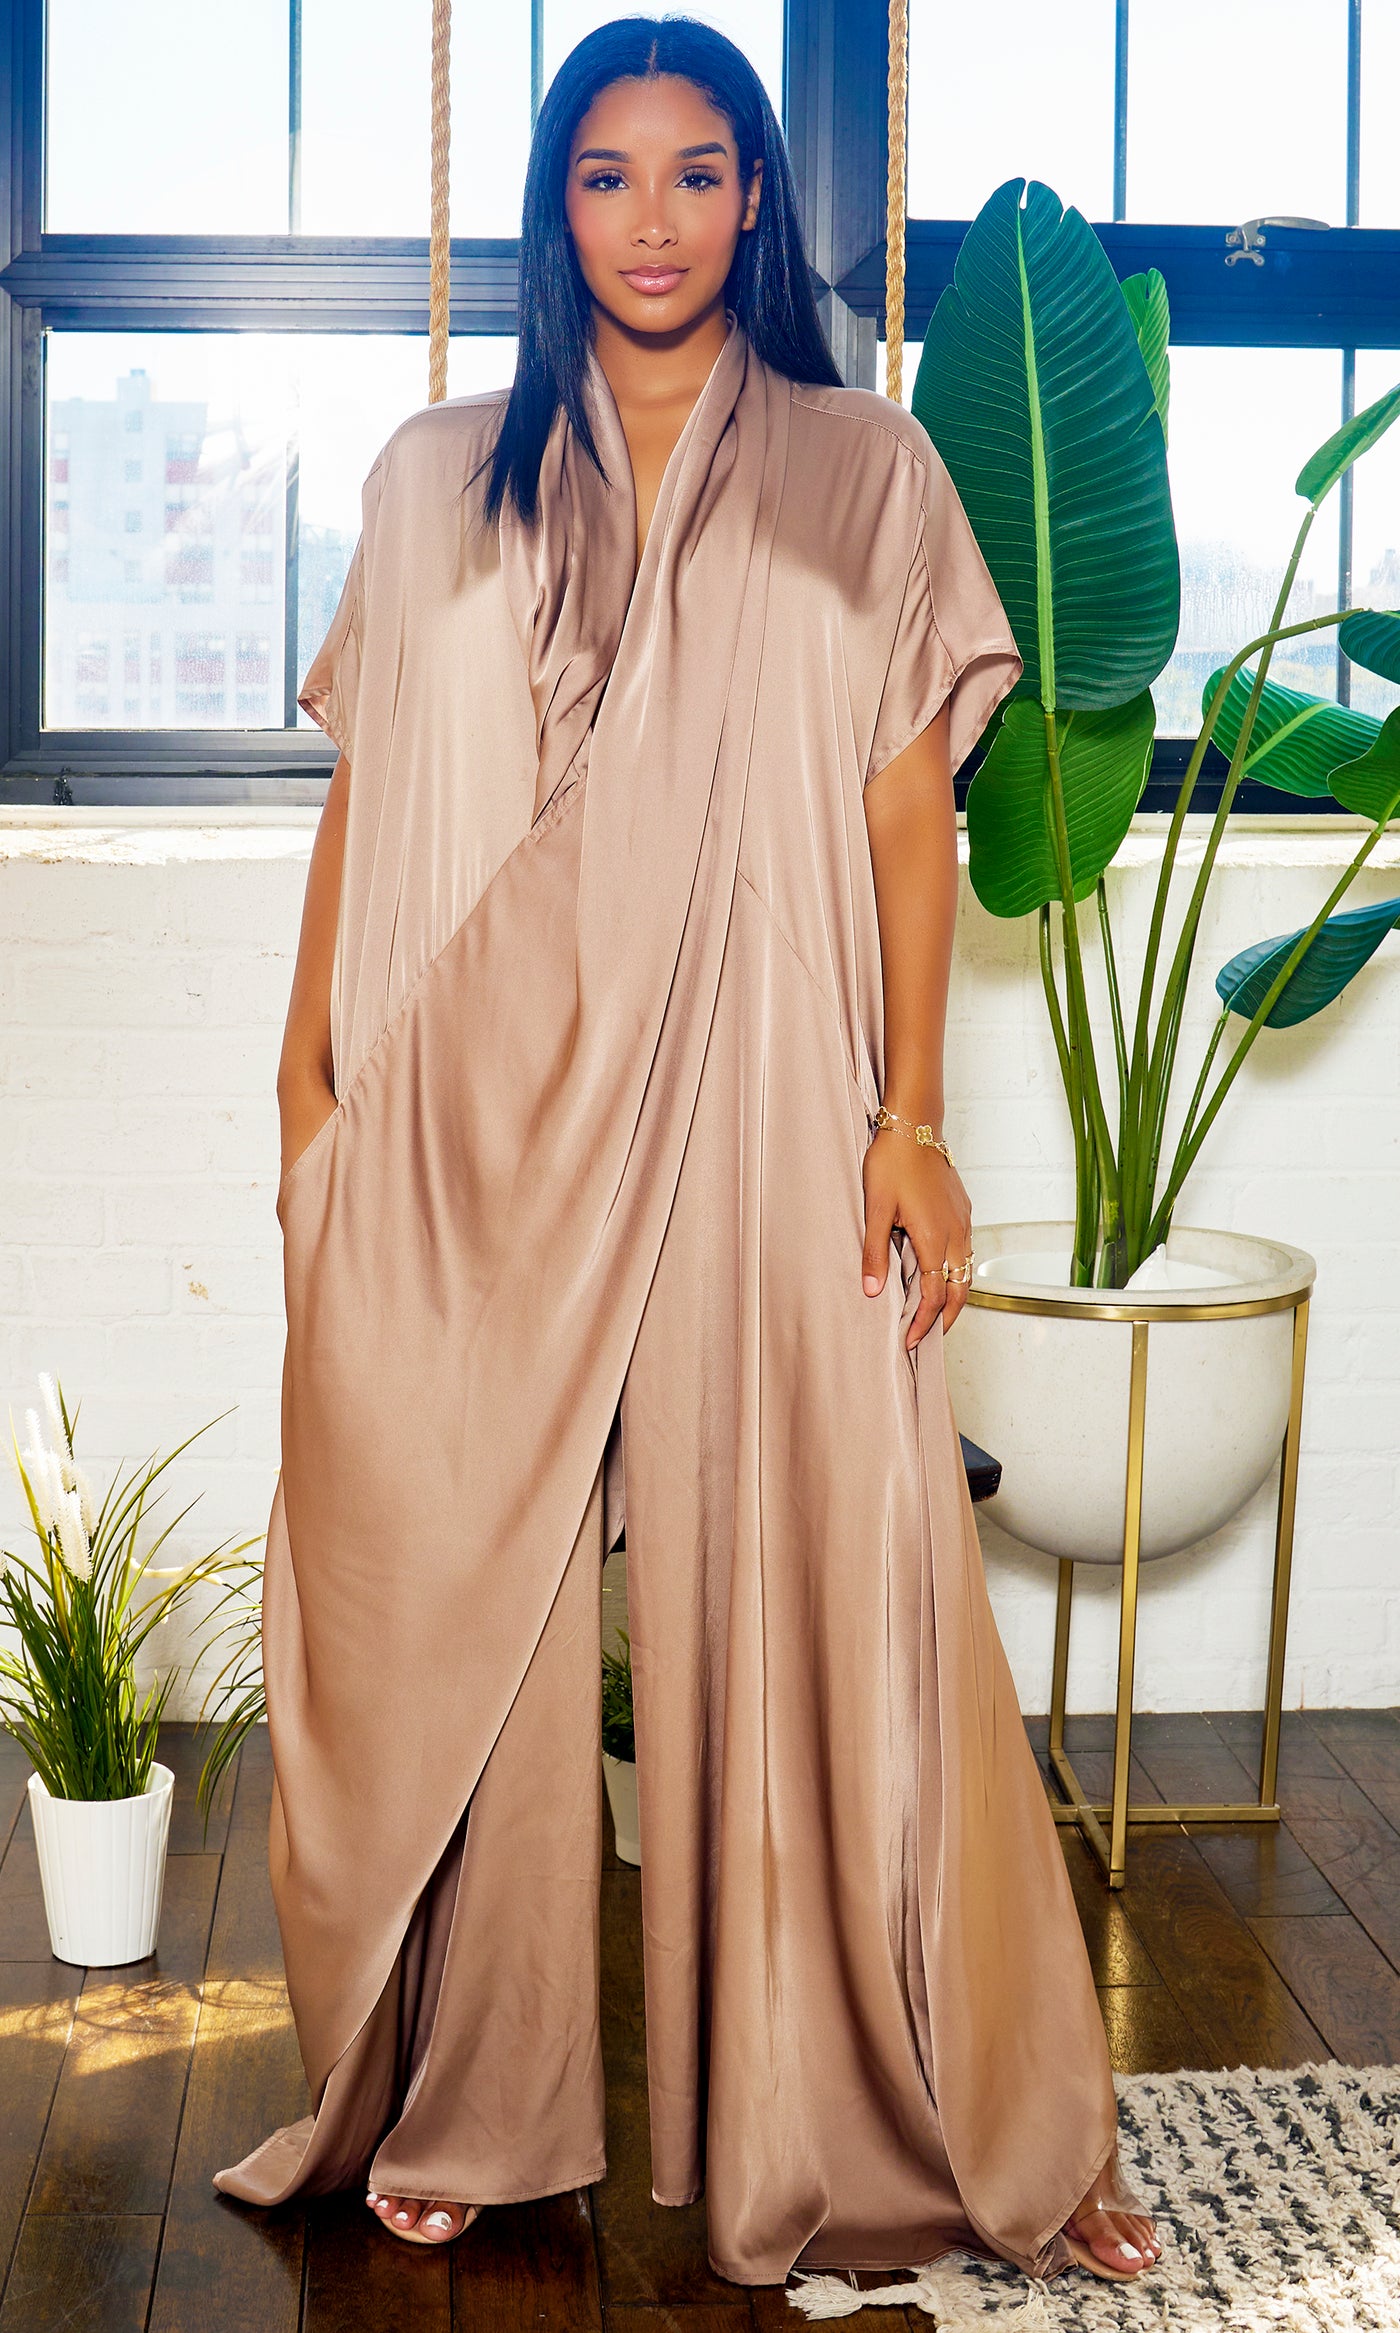 Luxe Drape Loose Fit Jumpsuit - Bronze PREORDER Ships End October - Cutely Covered